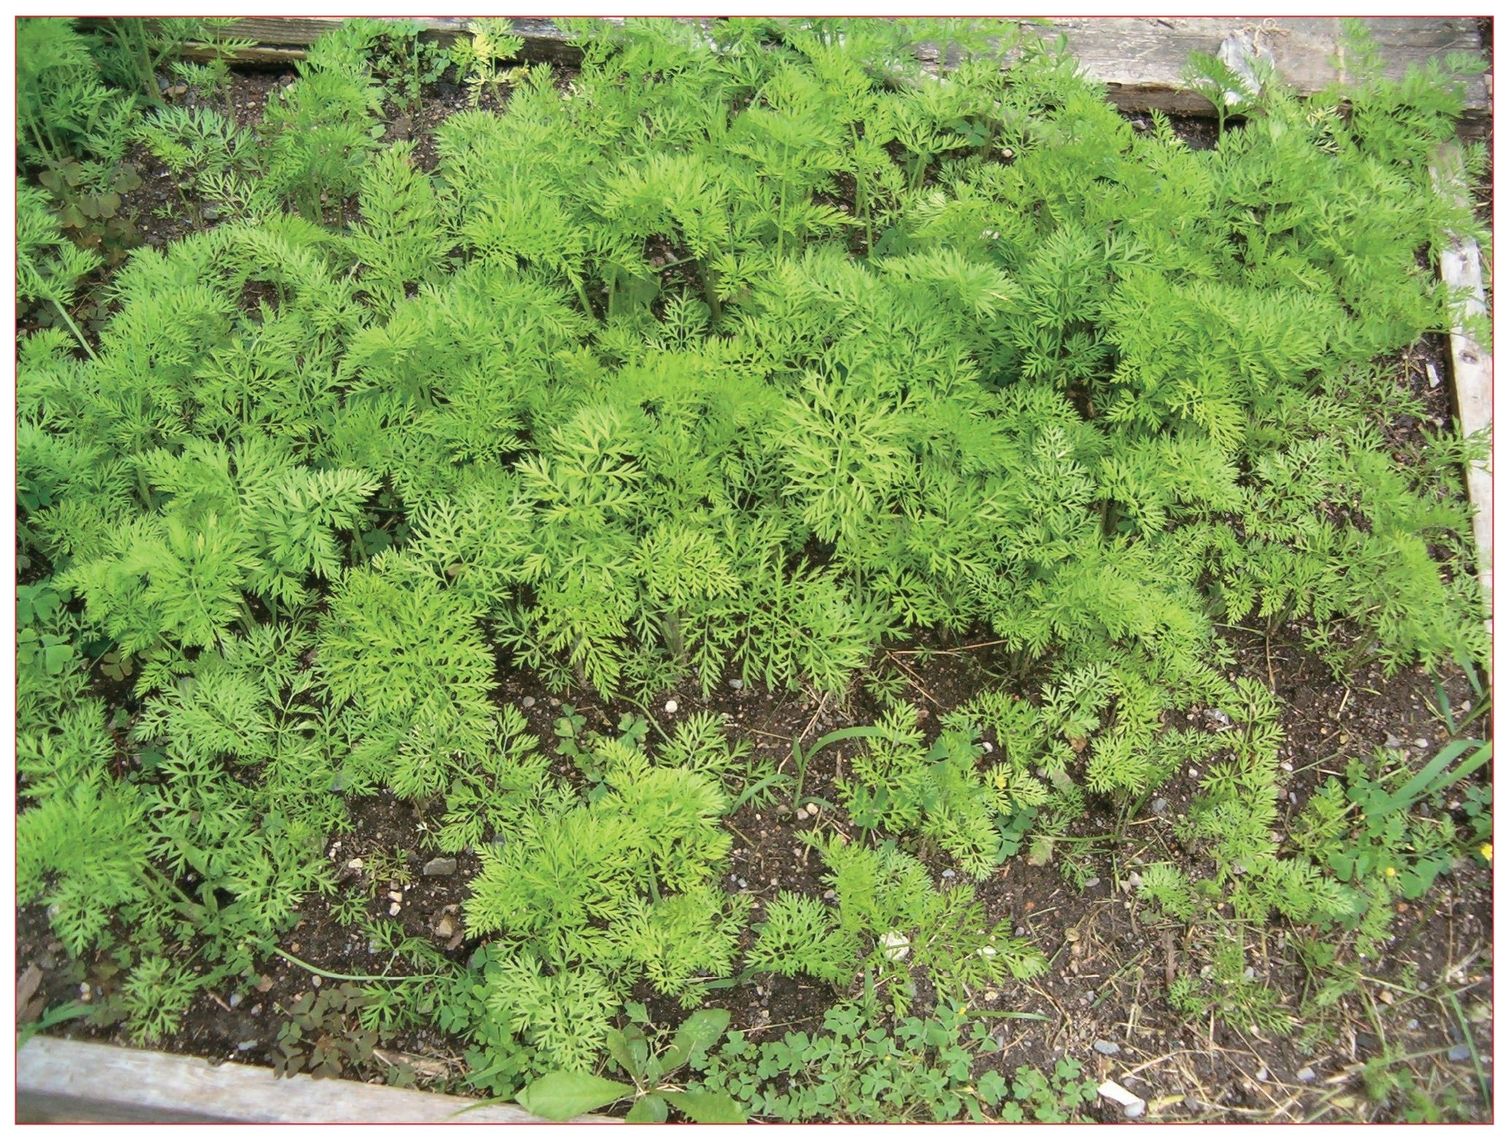 Carrots planted intensively in a raised bed yielded 100 pounds in just 32 - photo 9